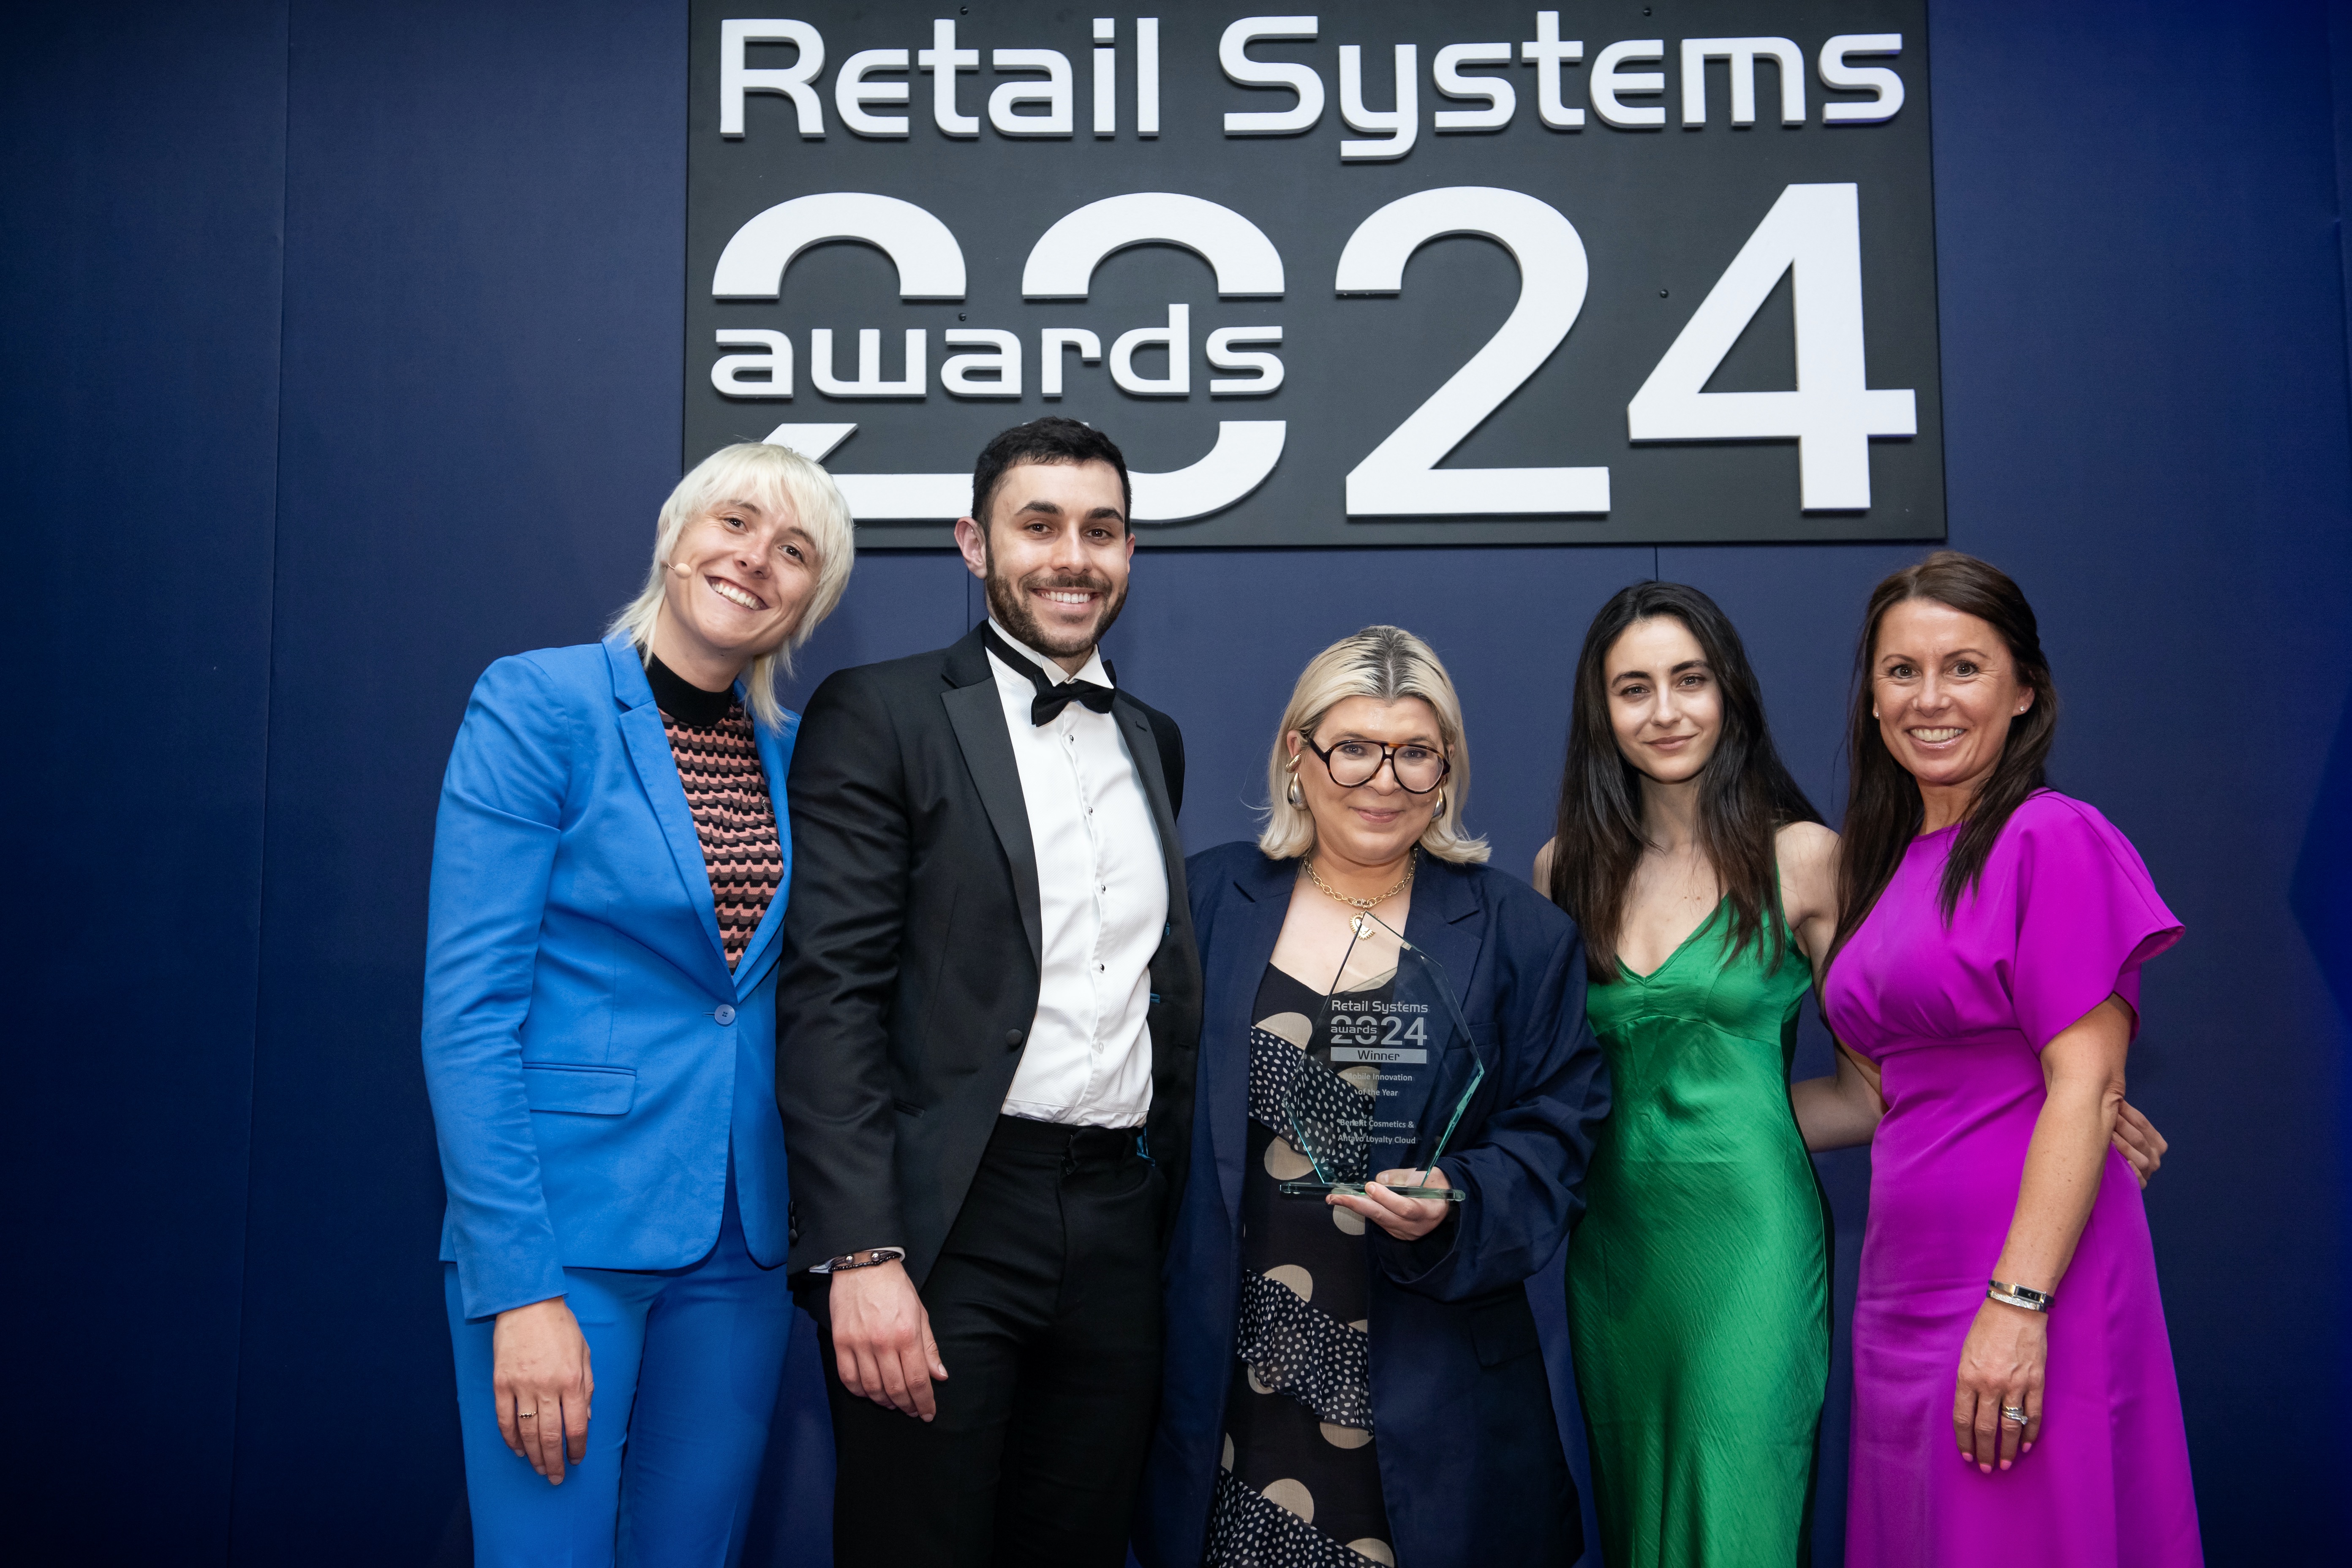 Image for the Retail Systems Awards winner news article